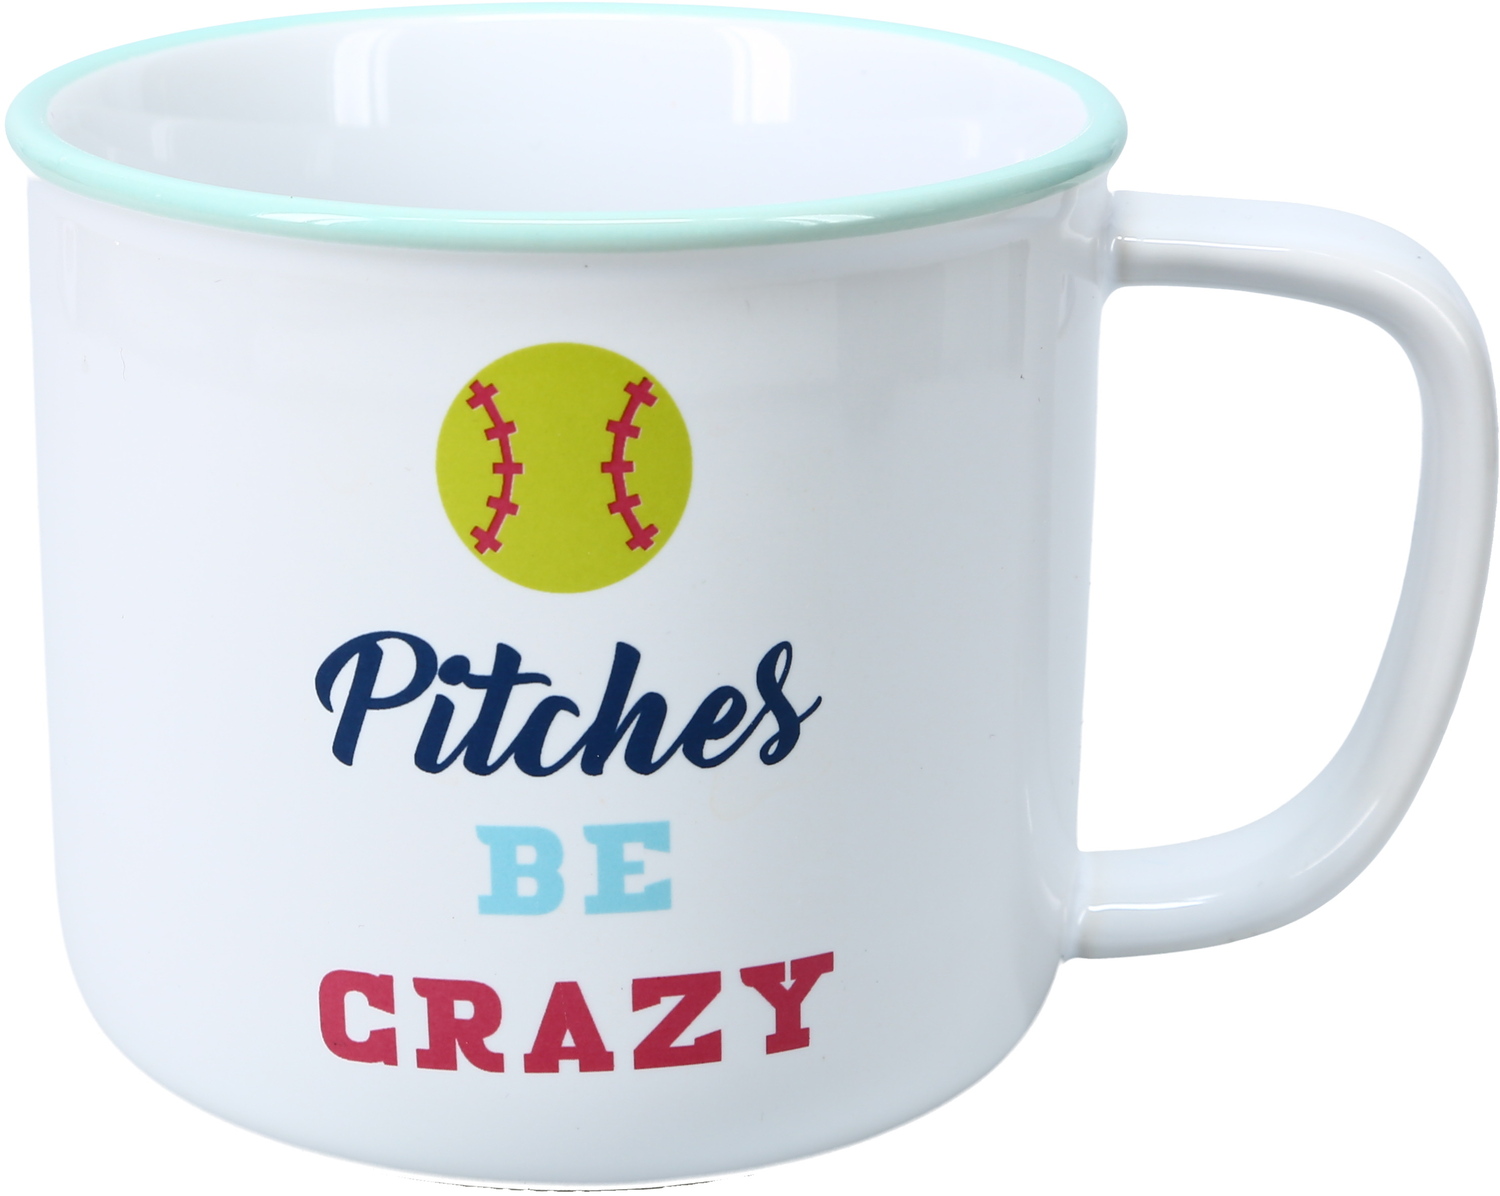 Pitches Be Crazy by We People - Pitches Be Crazy - 17 oz Mug